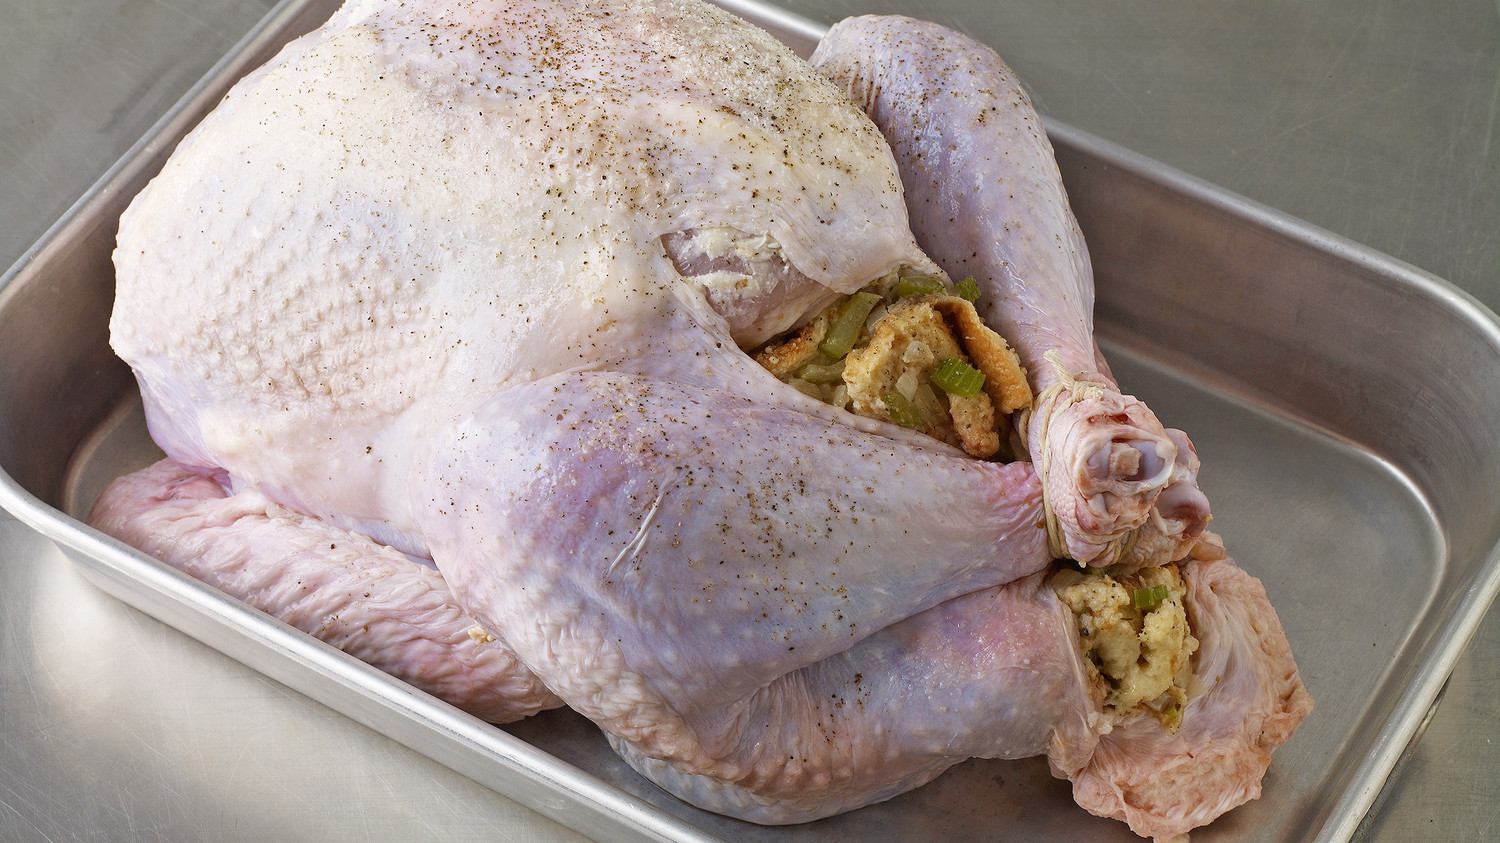 Prepare Turkey For Thanksgiving
 How to Stuff and Prepare Your Thanksgiving Turkey